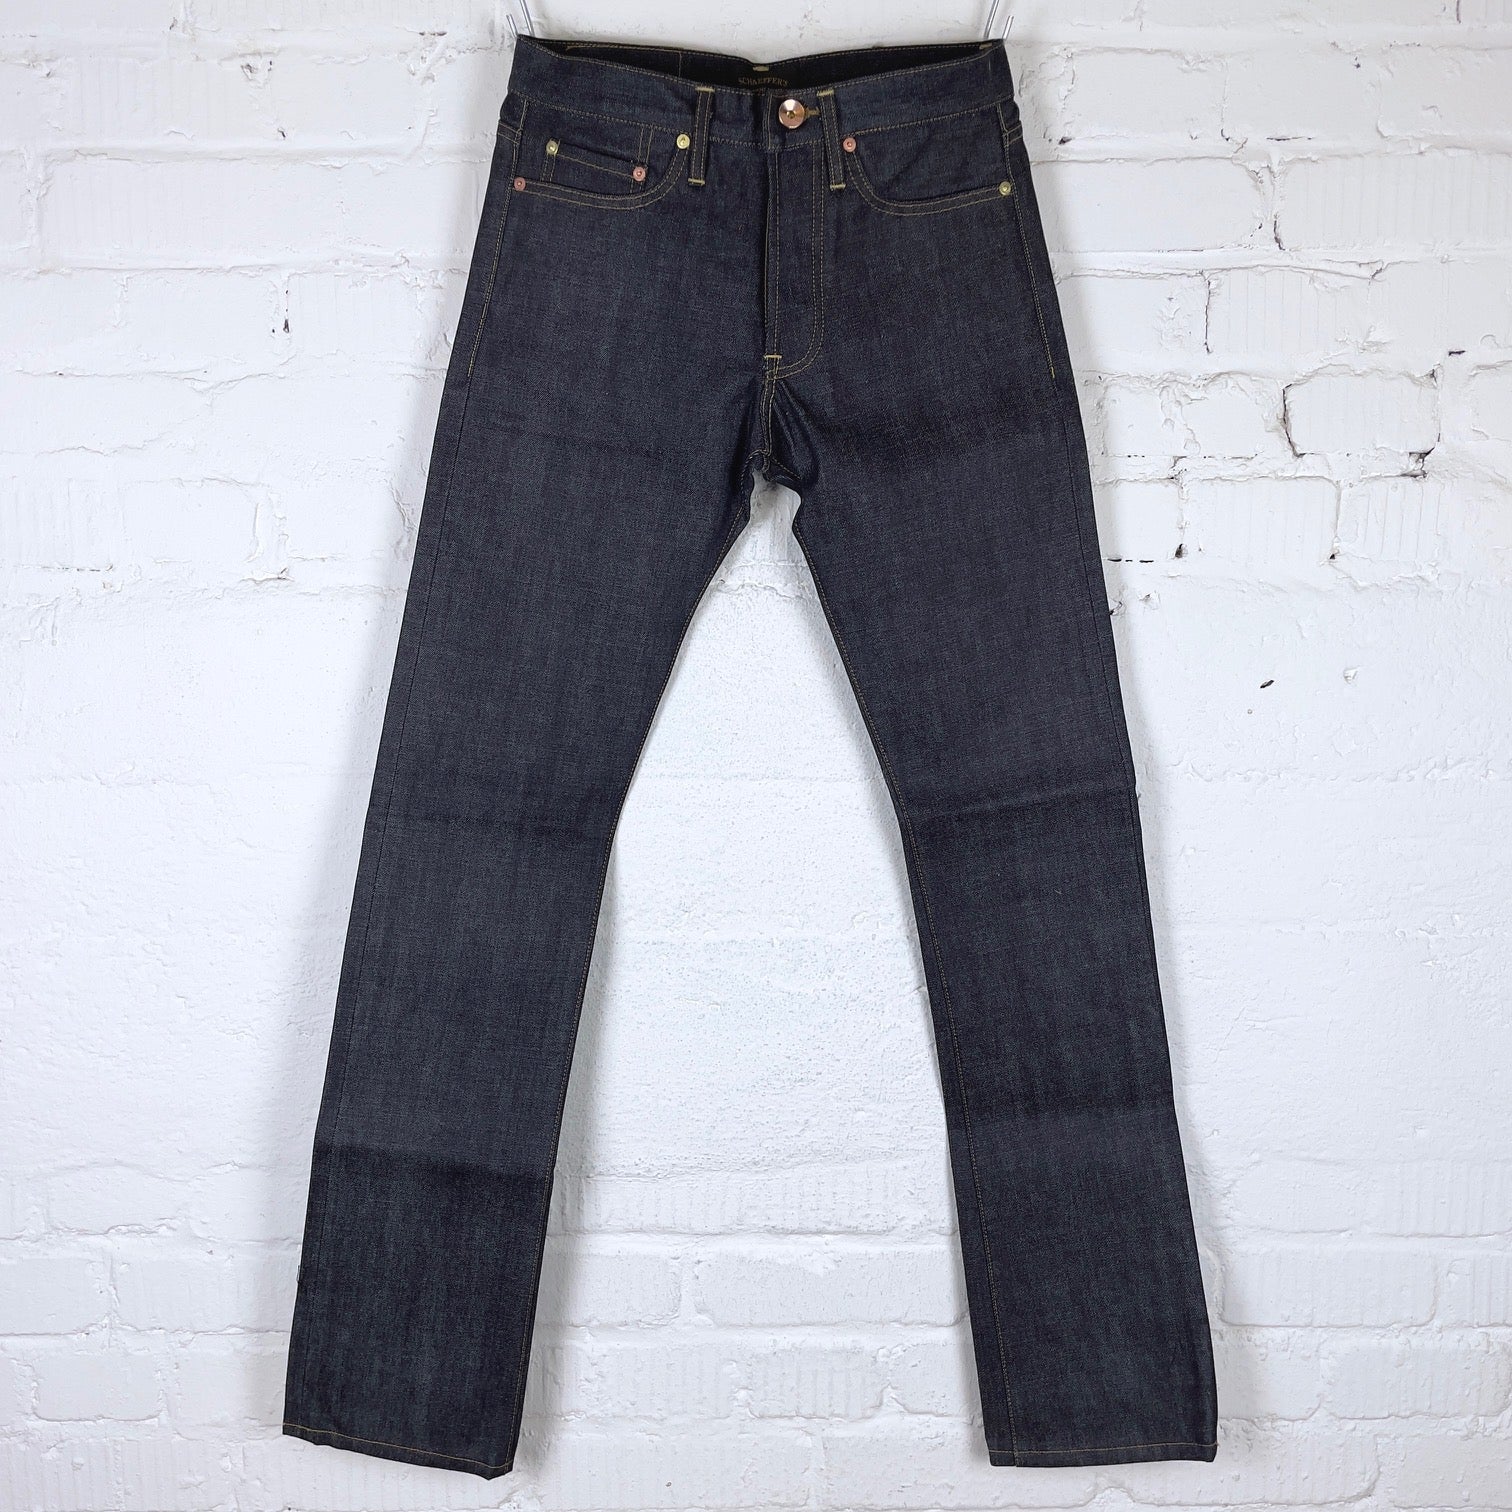 MASSIVE restock in Schaeffer's Garment Hotel indigo Standard Straight jeans!!  A perfect slim/straight (and one of my all time faves), m